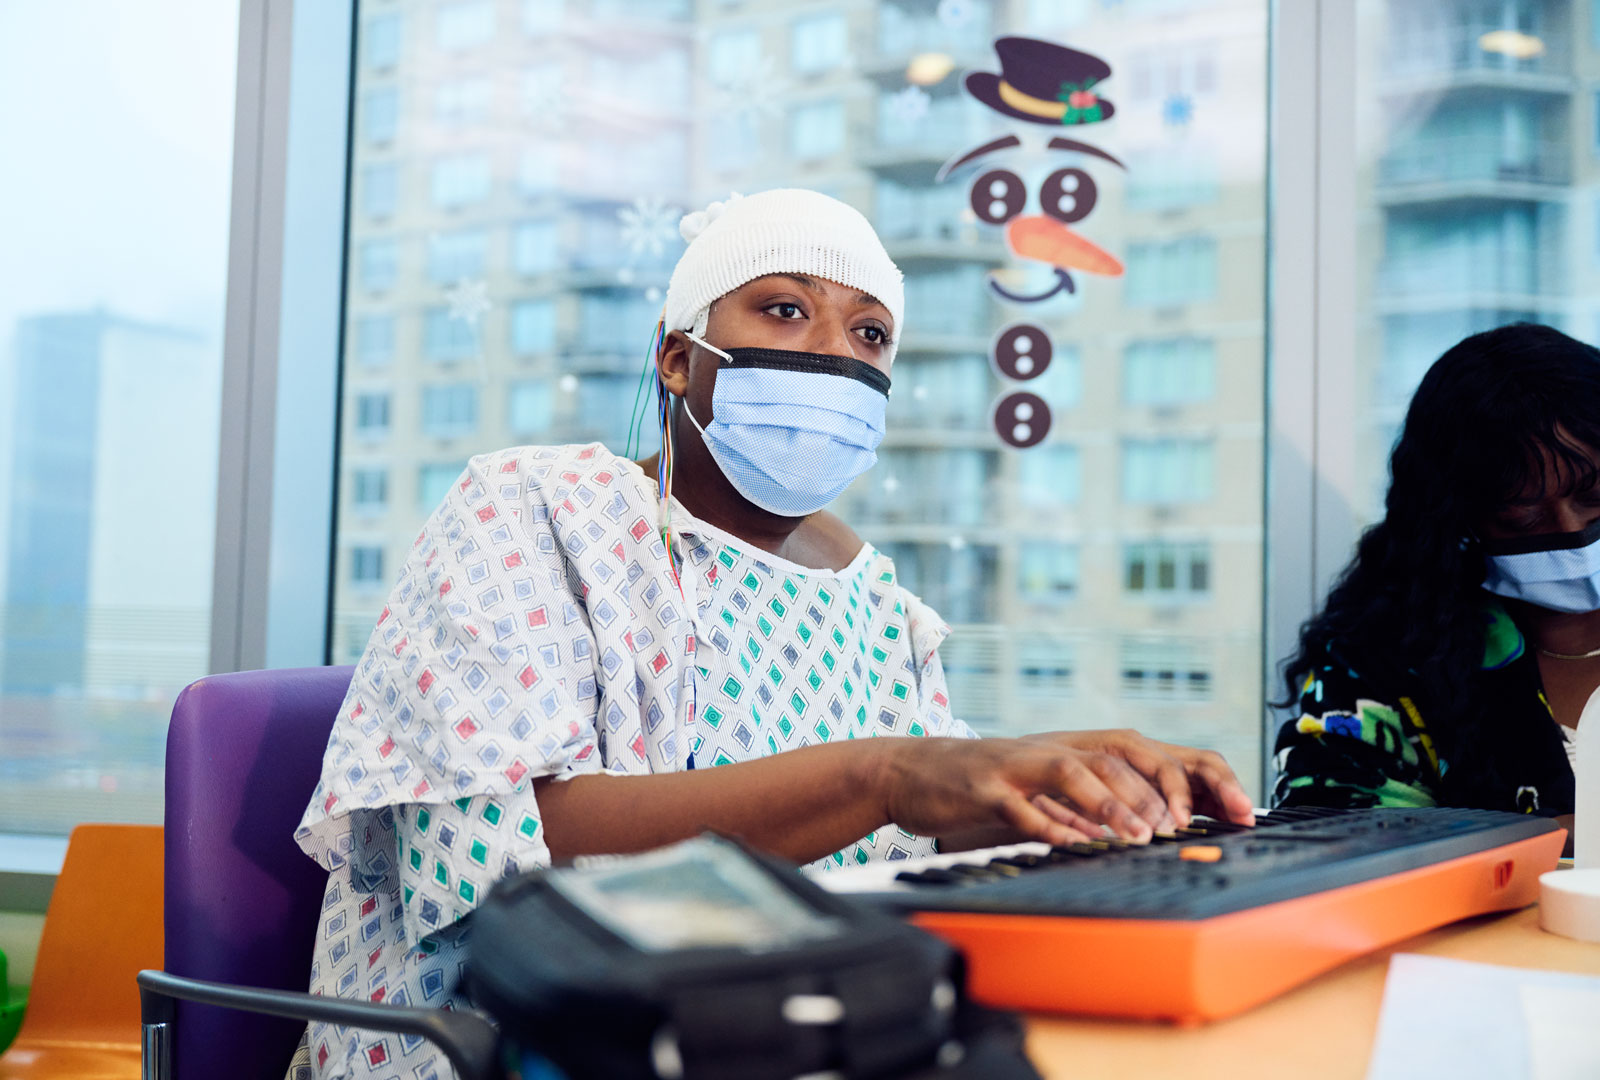 Patient wearing gown and face mask playing keyboard